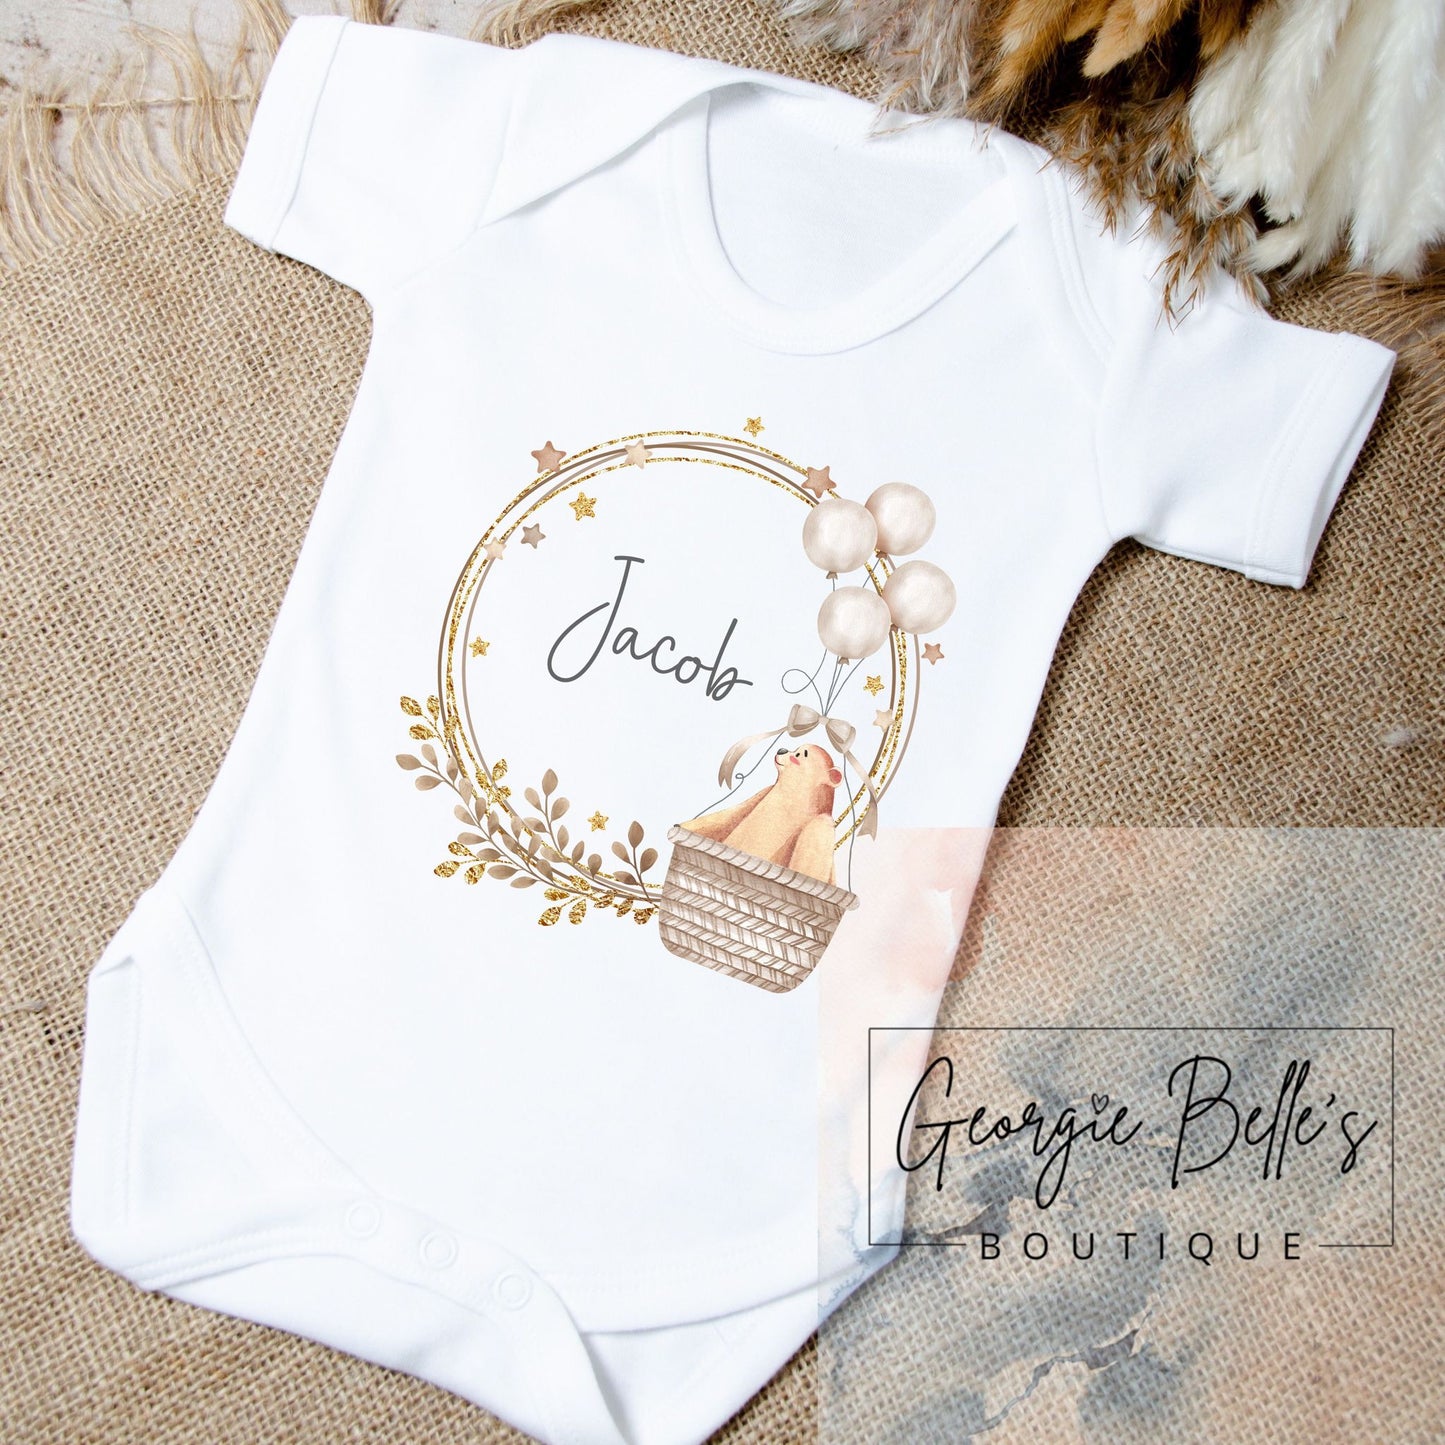 Personalised Vest / Babygrow -  Gold/Nude Hot Air Balloon Design